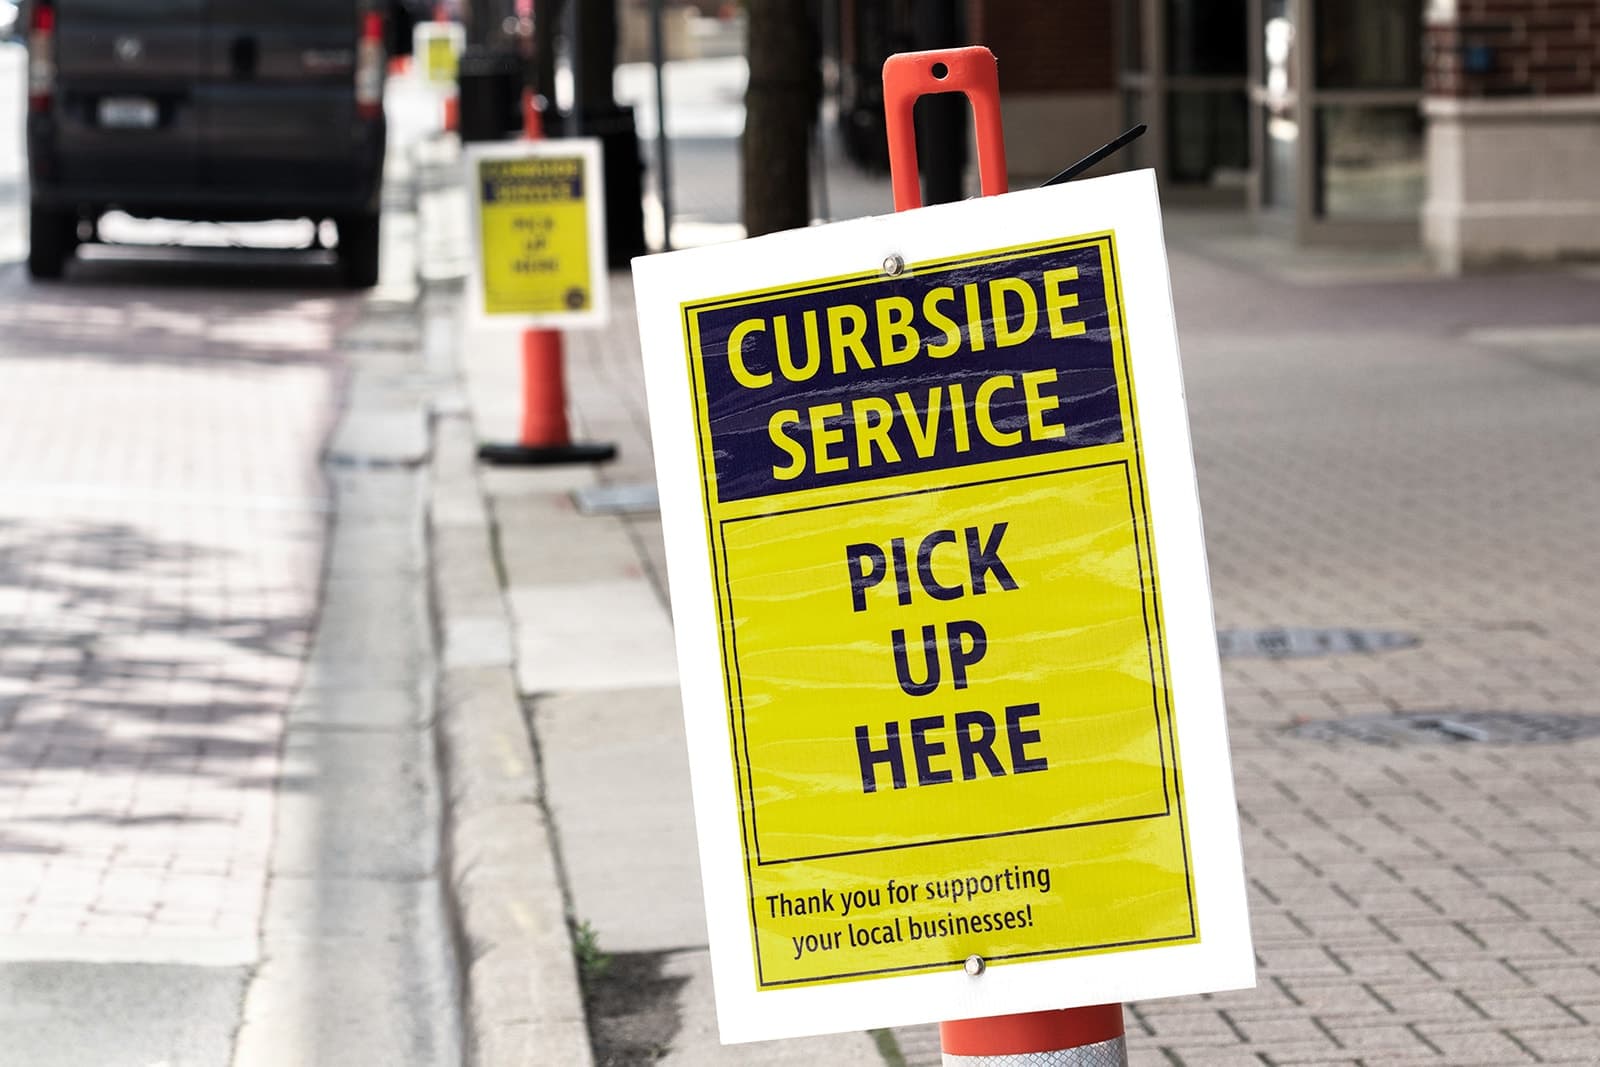 Sign on the street indicating curbside service